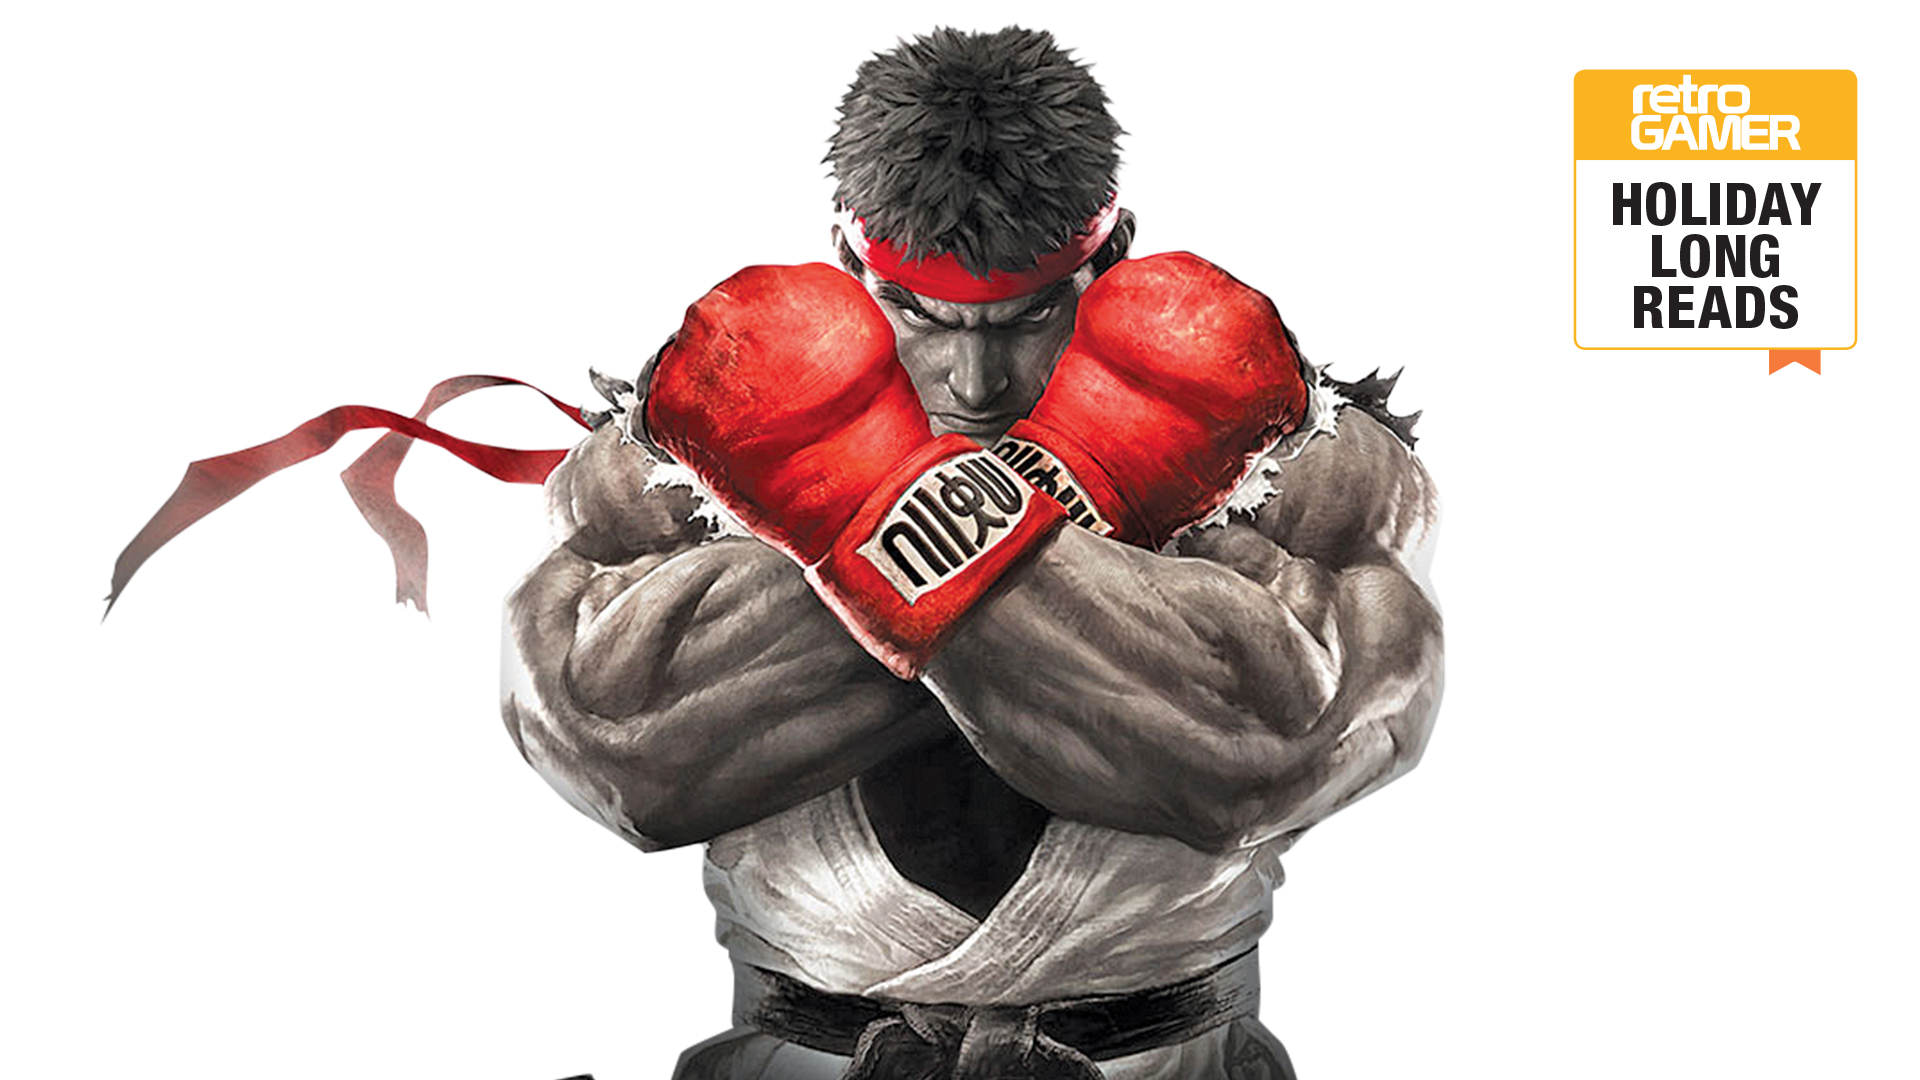 “These characters are like my children”: Street Fighter’s community of players, creators, and fans on what makes the series so special